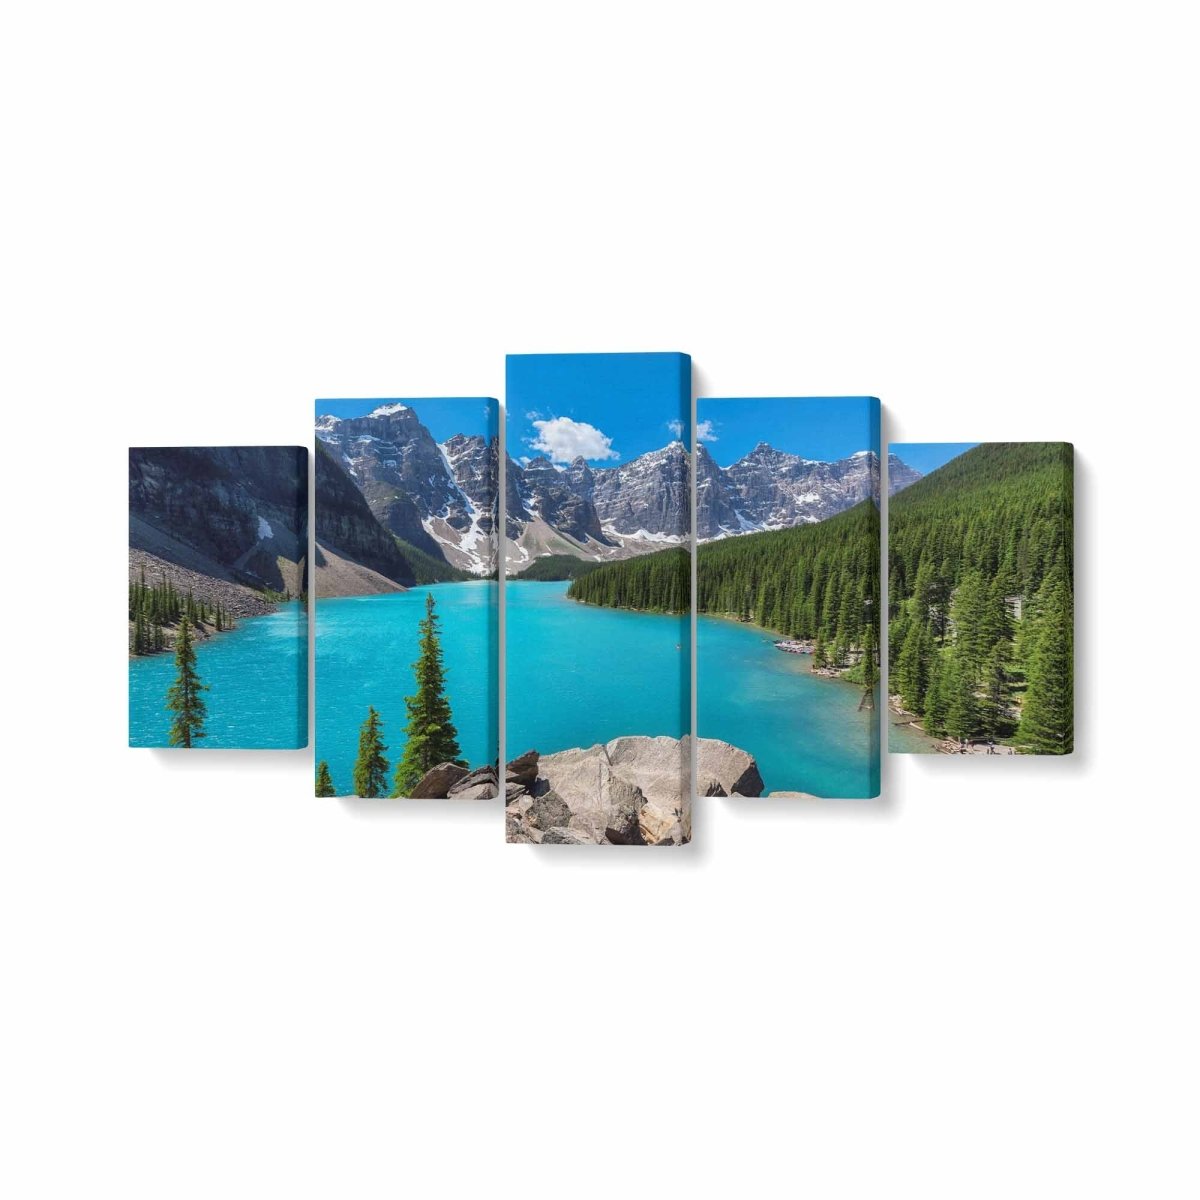 Tablou MultiCanvas 5 piese Moraine Lake - clevny.ro